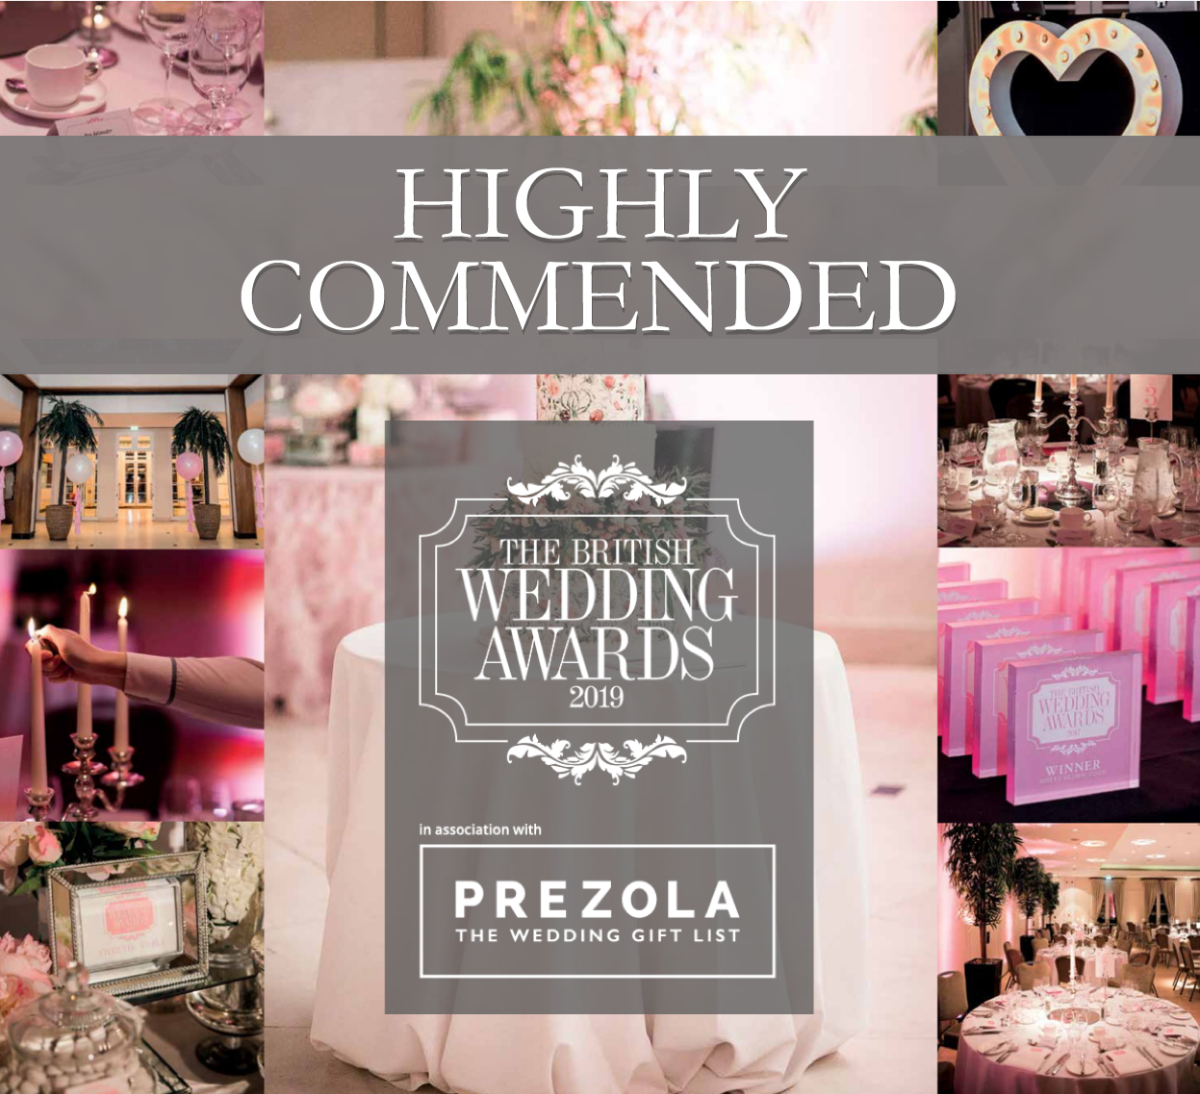 Cornish Tipi Weddings has been Highly Commended in the Outdoor Wedding Venue category in The British Wedding Awards 2019. 